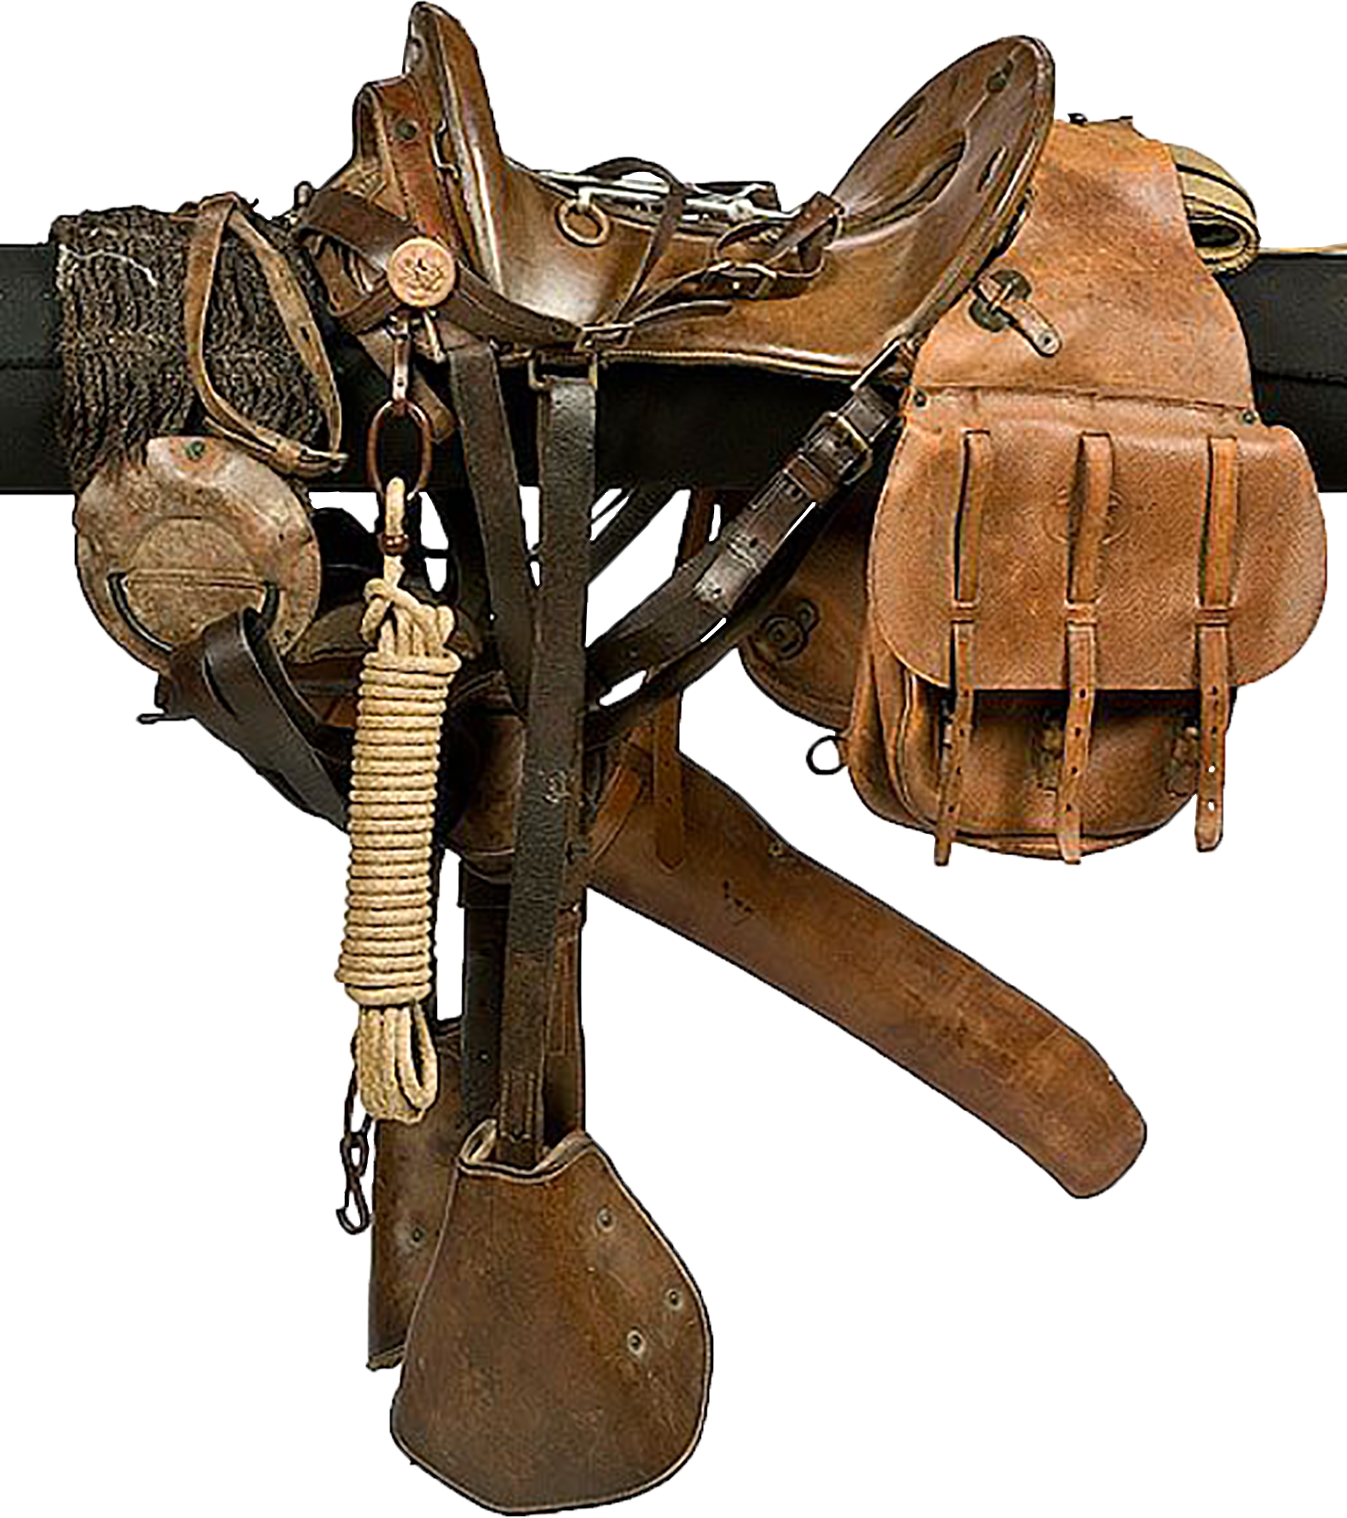 Cut out of a McClellan Cavalry Saddle.